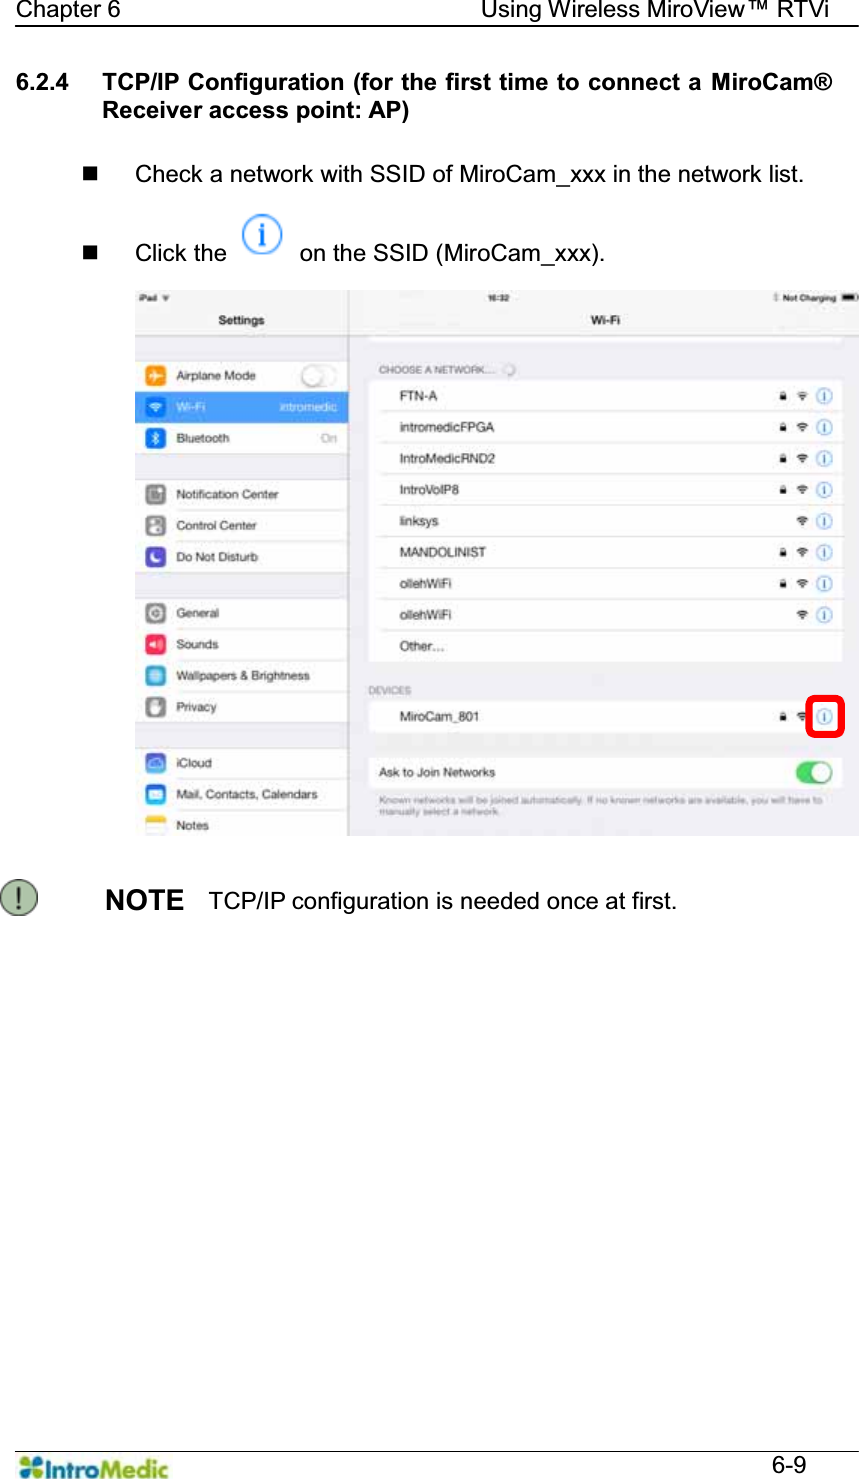   Chapter 6                              Using Wireless MiroView RTVi  6-9 6.2.4  TCP/IP Configuration (for the first time to connect a MiroCam® Receiver access point: AP)    Check a network with SSID of MiroCam_xxx in the network list.  Click the    on the SSID (MiroCam_xxx).  NOTE  TCP/IP configuration is needed once at first.  